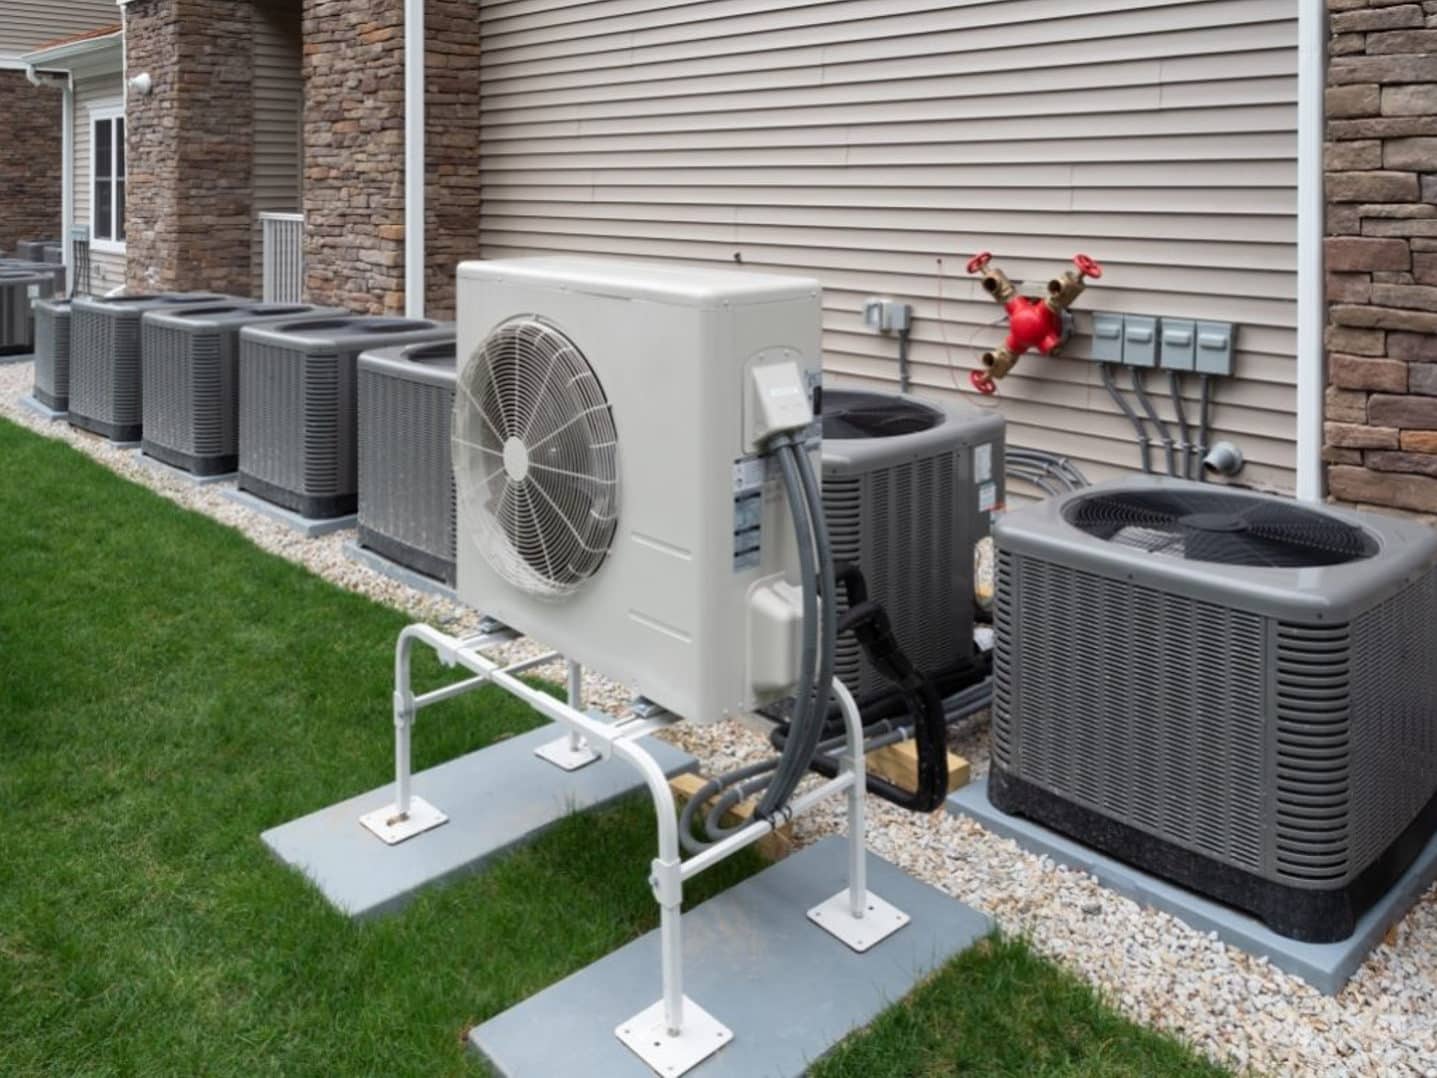 new ac installation and outdoor heating unit